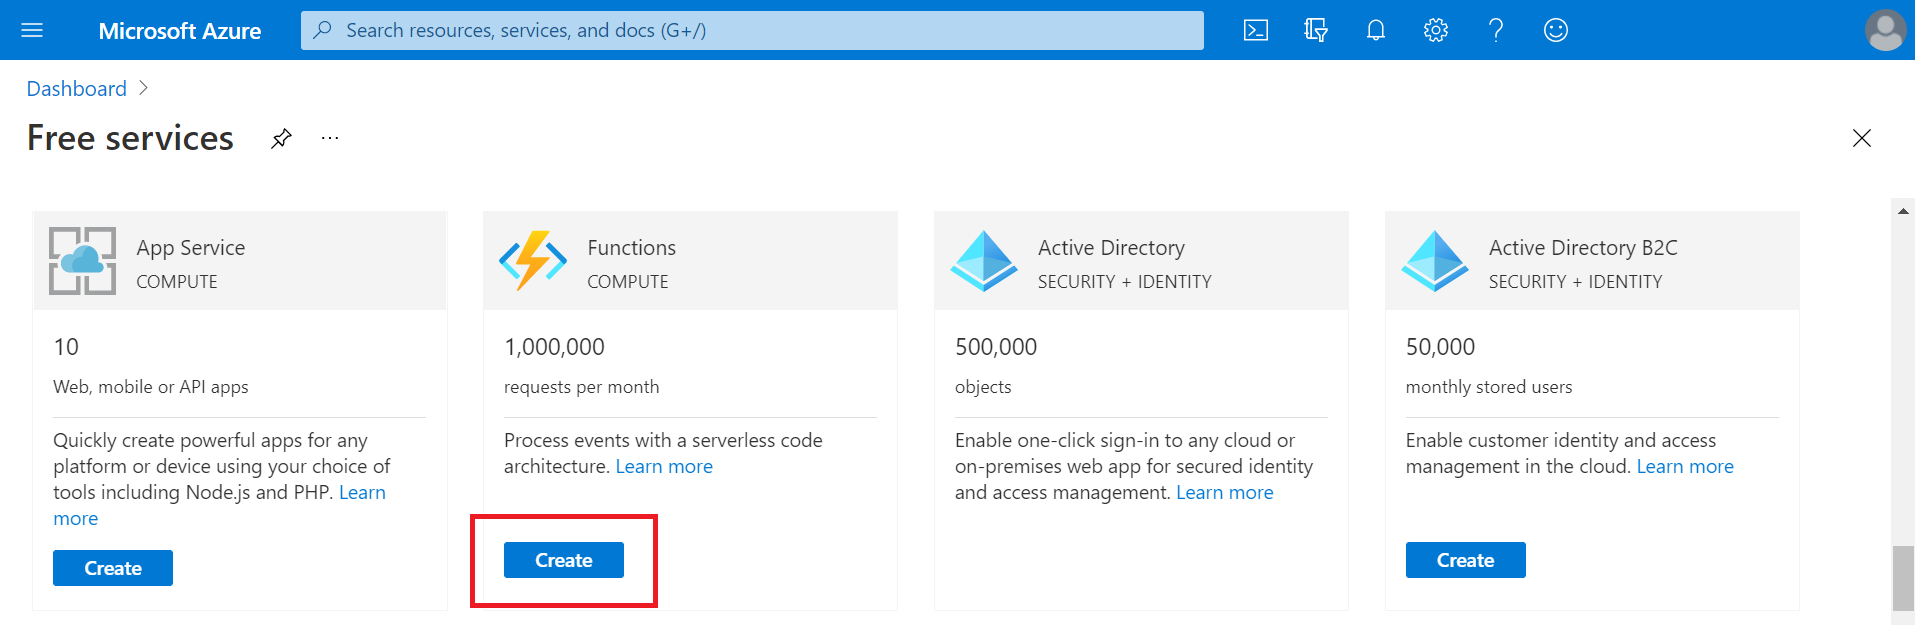 Functions within Free Services in the Azure Portal